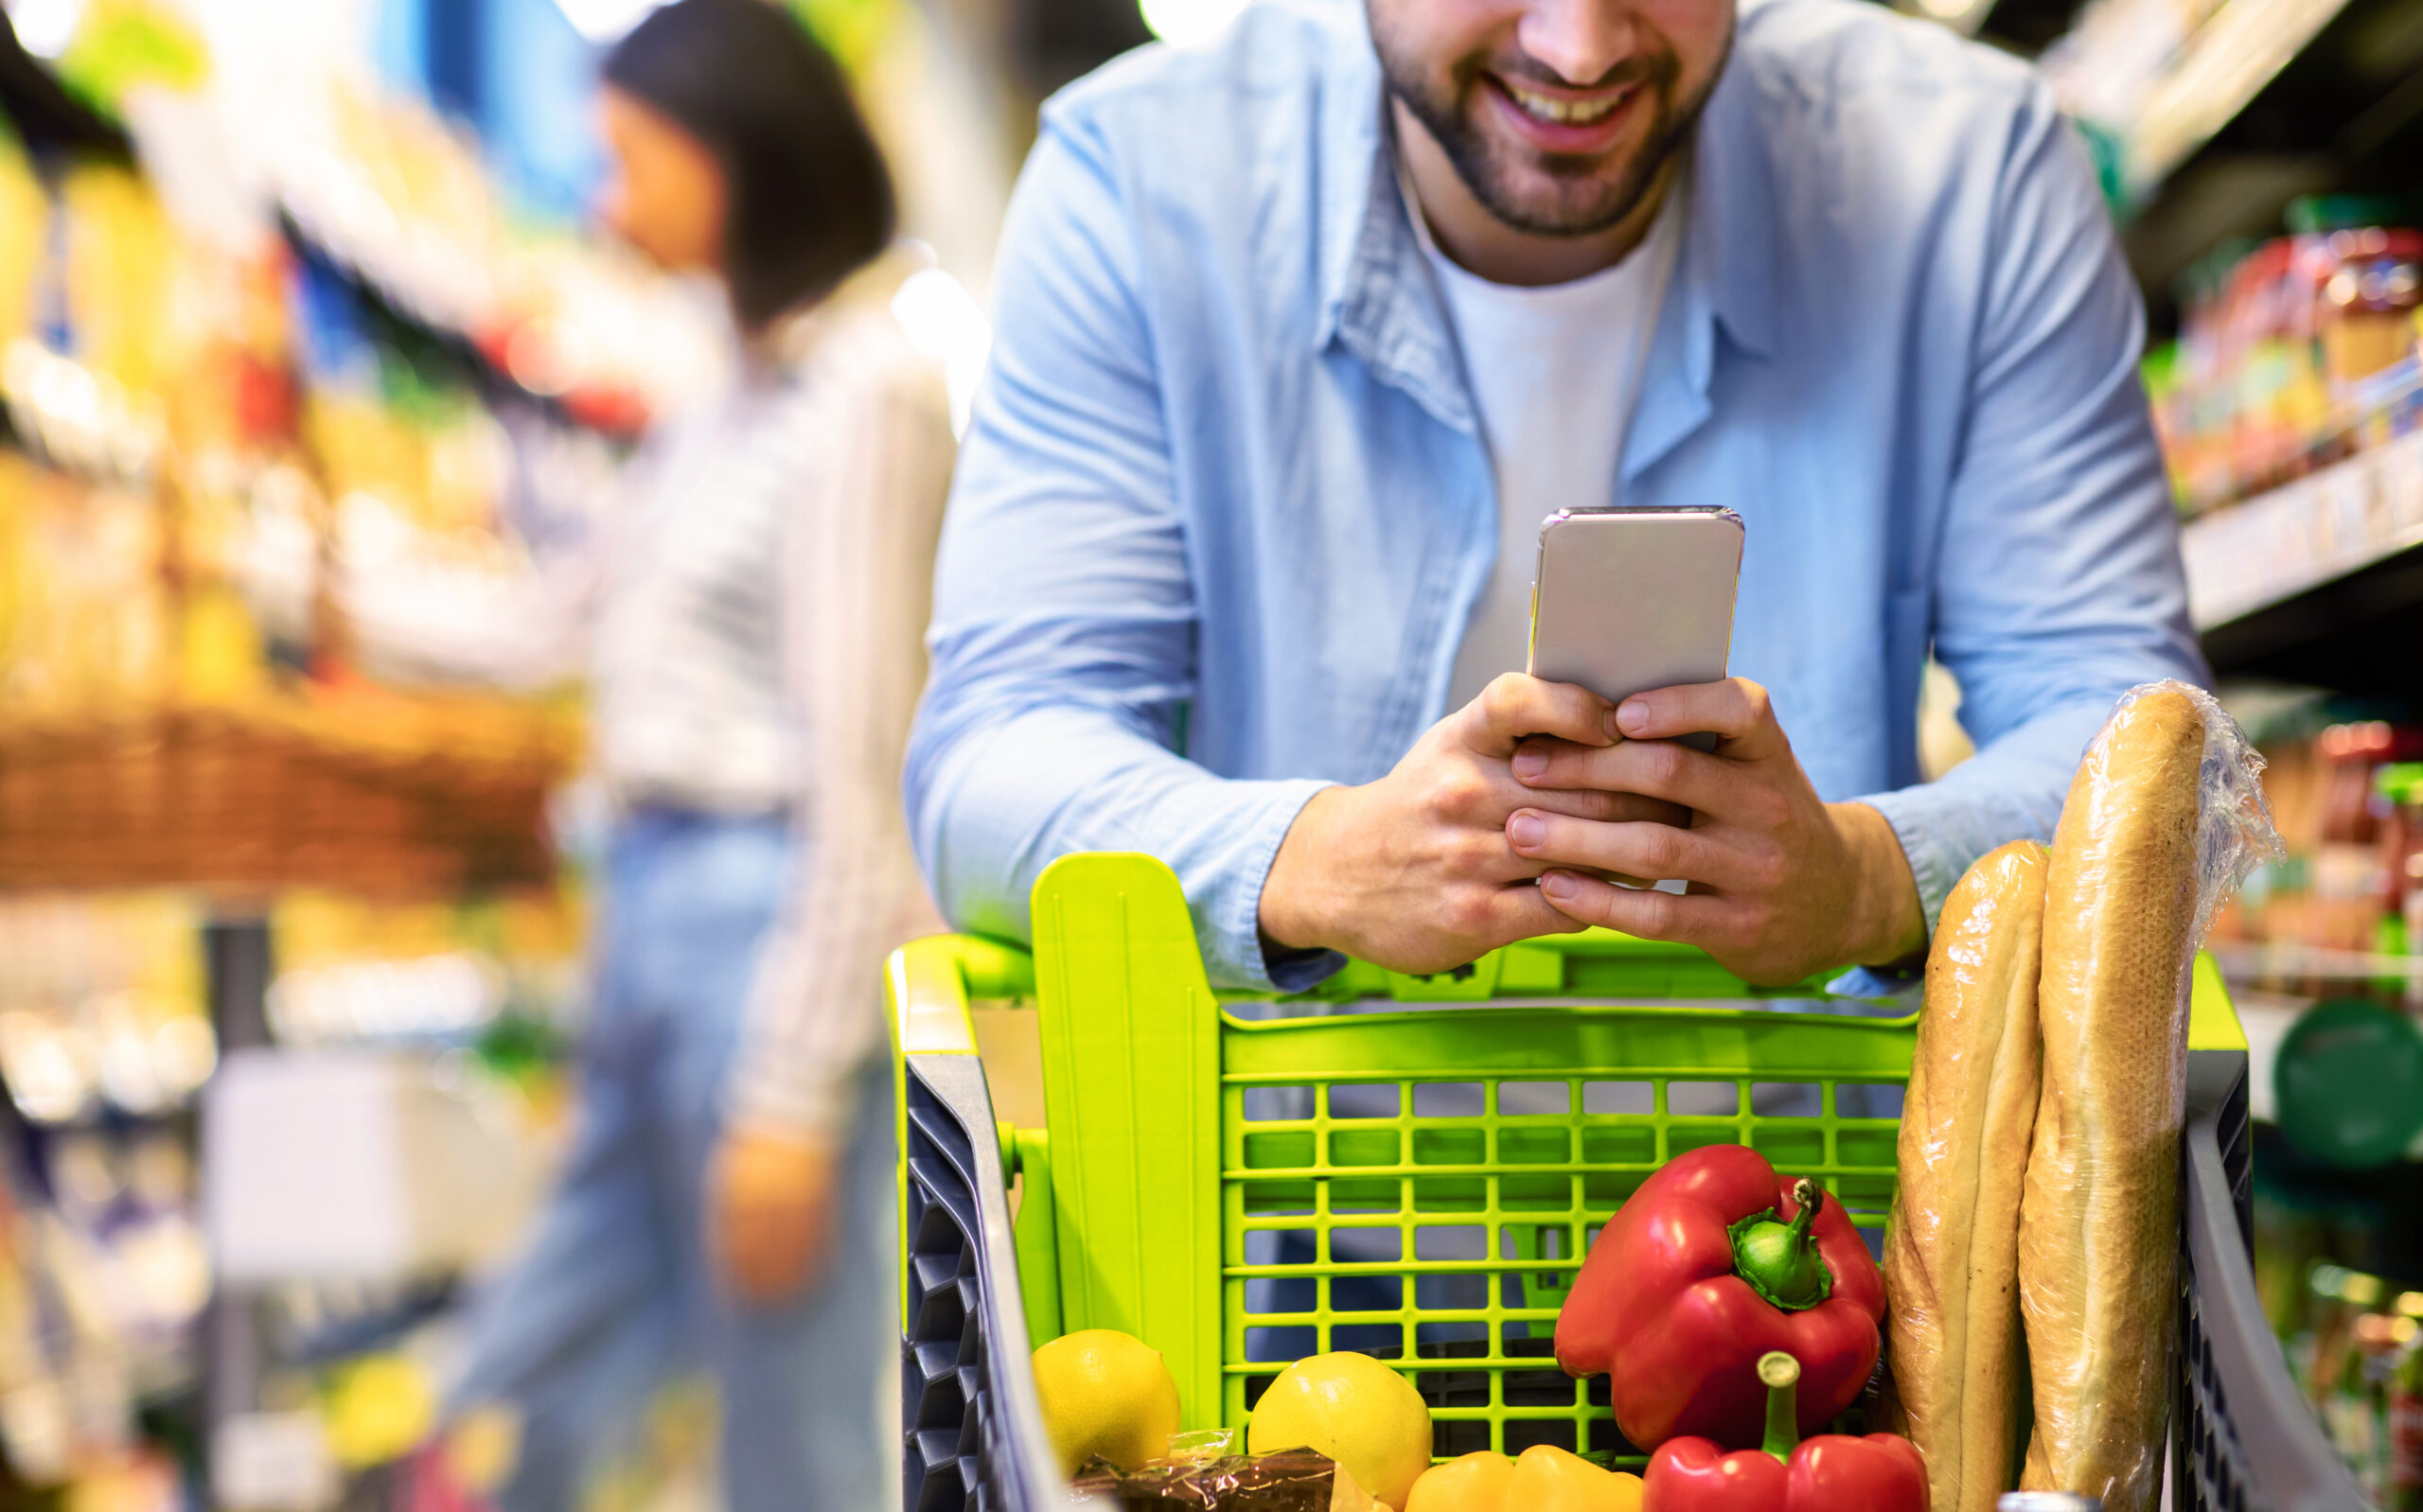 Closeup Of Unrecognizable Man Using Mobile Coupon App For Groceries Shopping Buying Food In Supermarket, Standing With Cart In Hypermarket. Smiling Guy Using Smartphone Purchasing Grocery In Shop